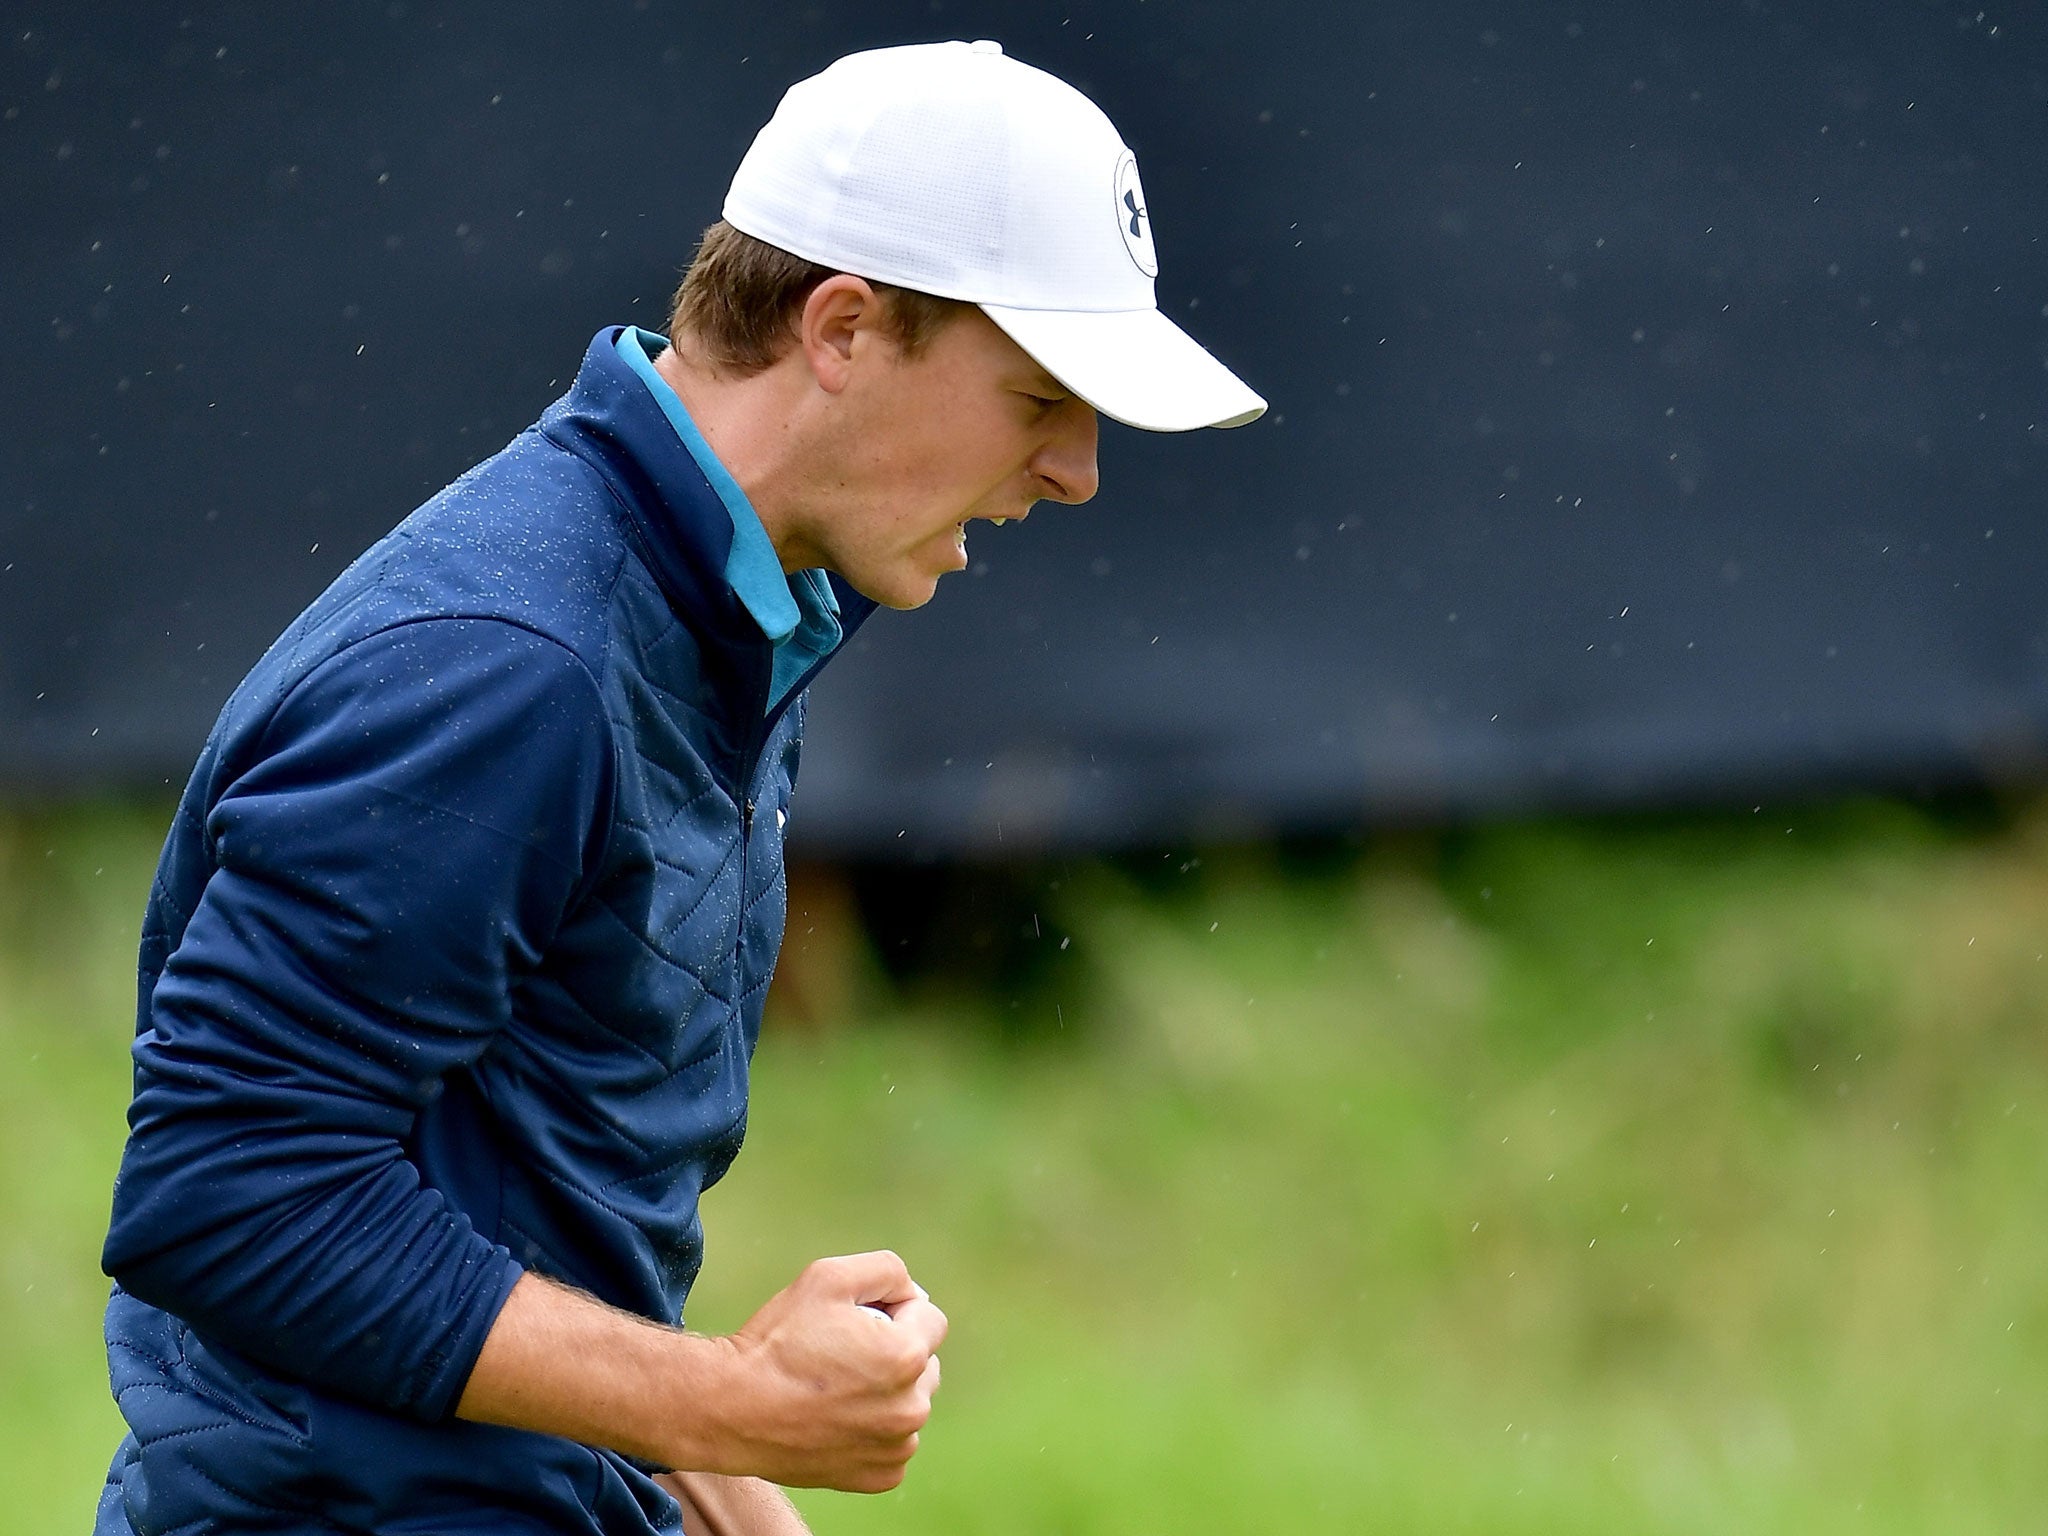 Spieth fought back after his slip-up on the 13th hole